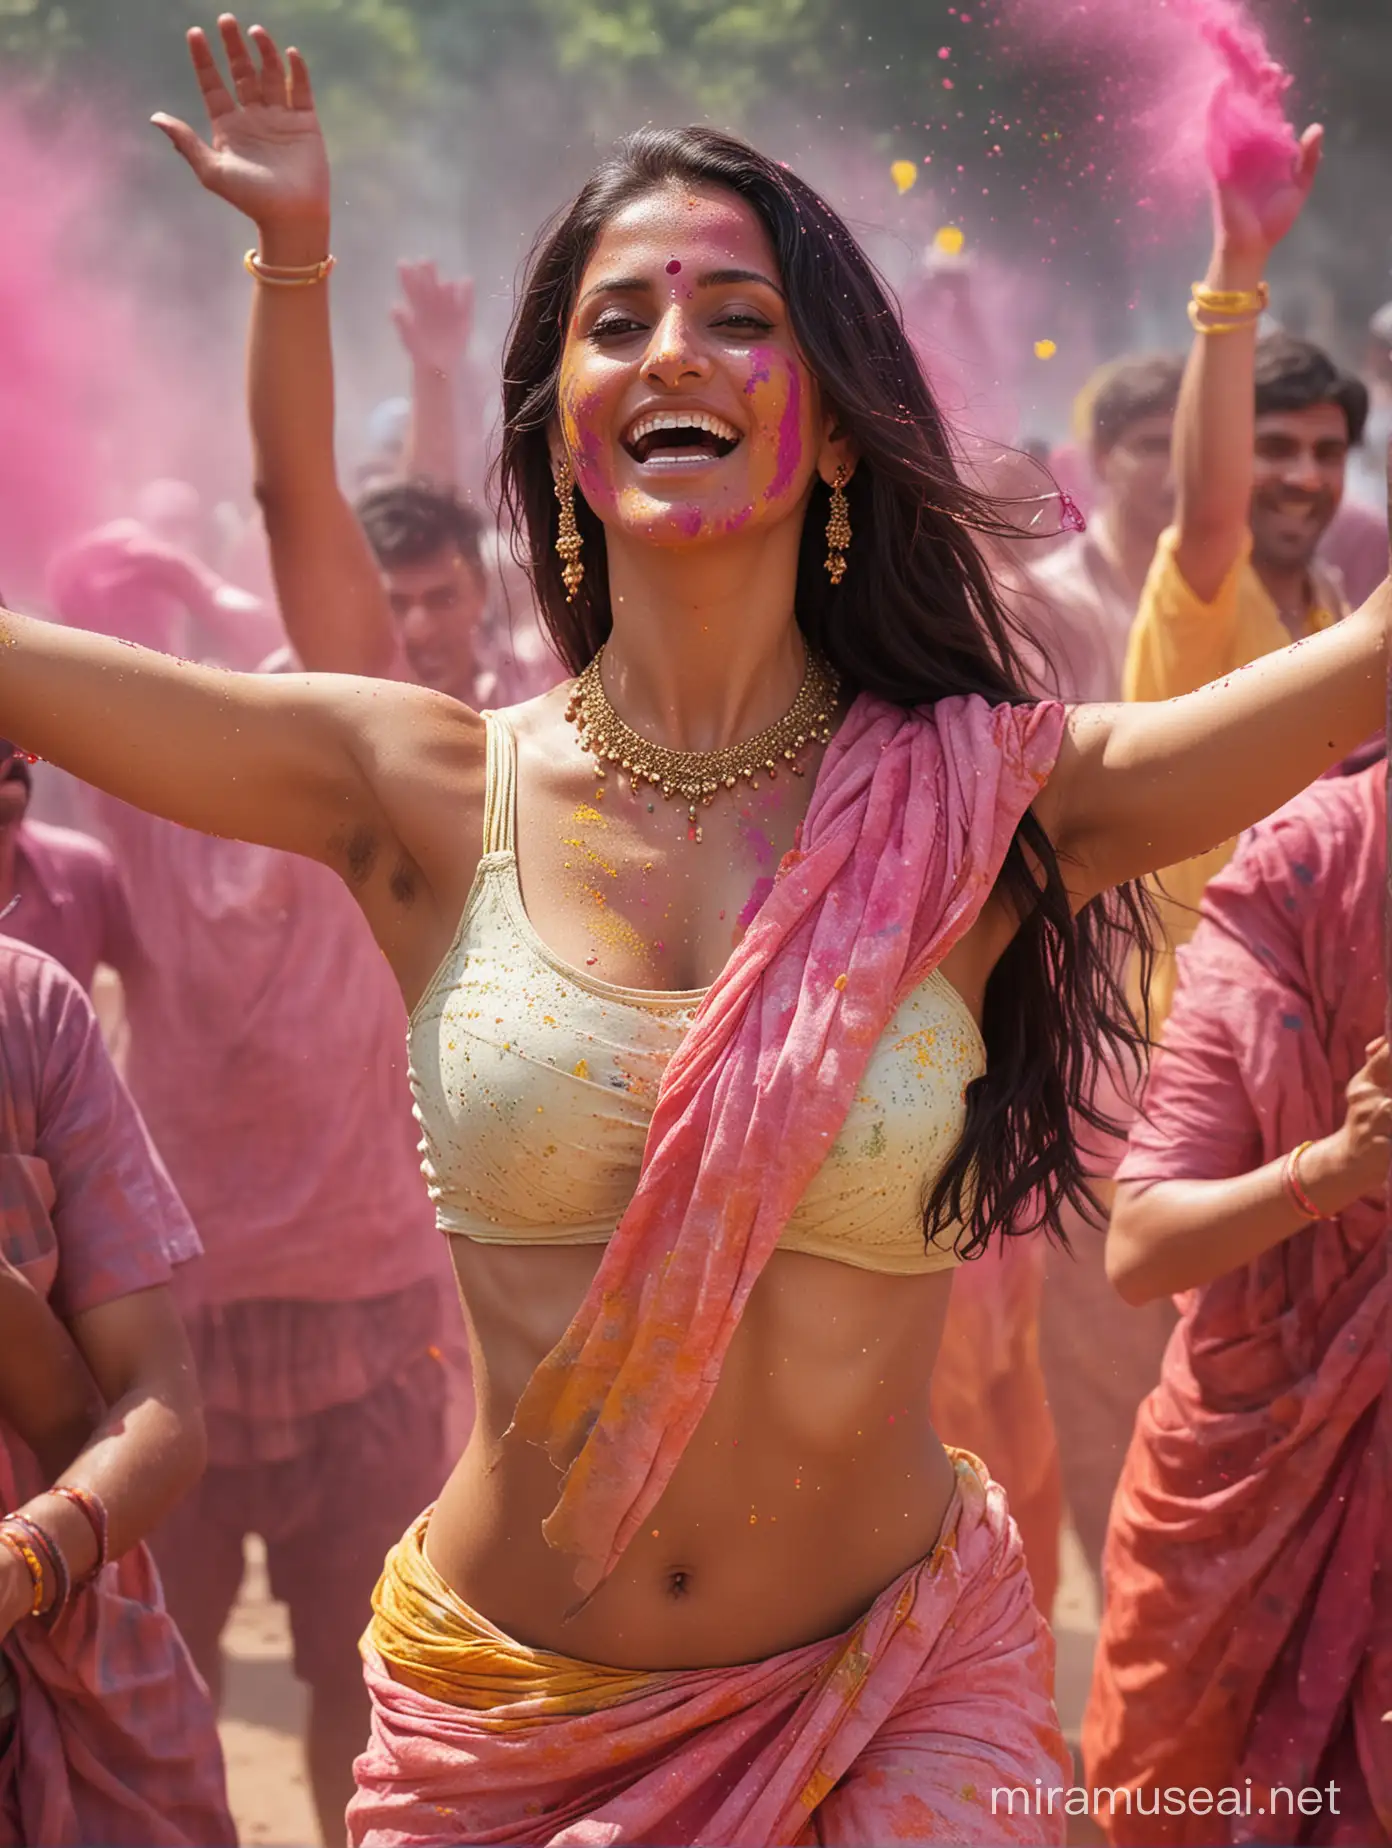 Indian Empowerment Bold Holi Celebration with Confident Woman